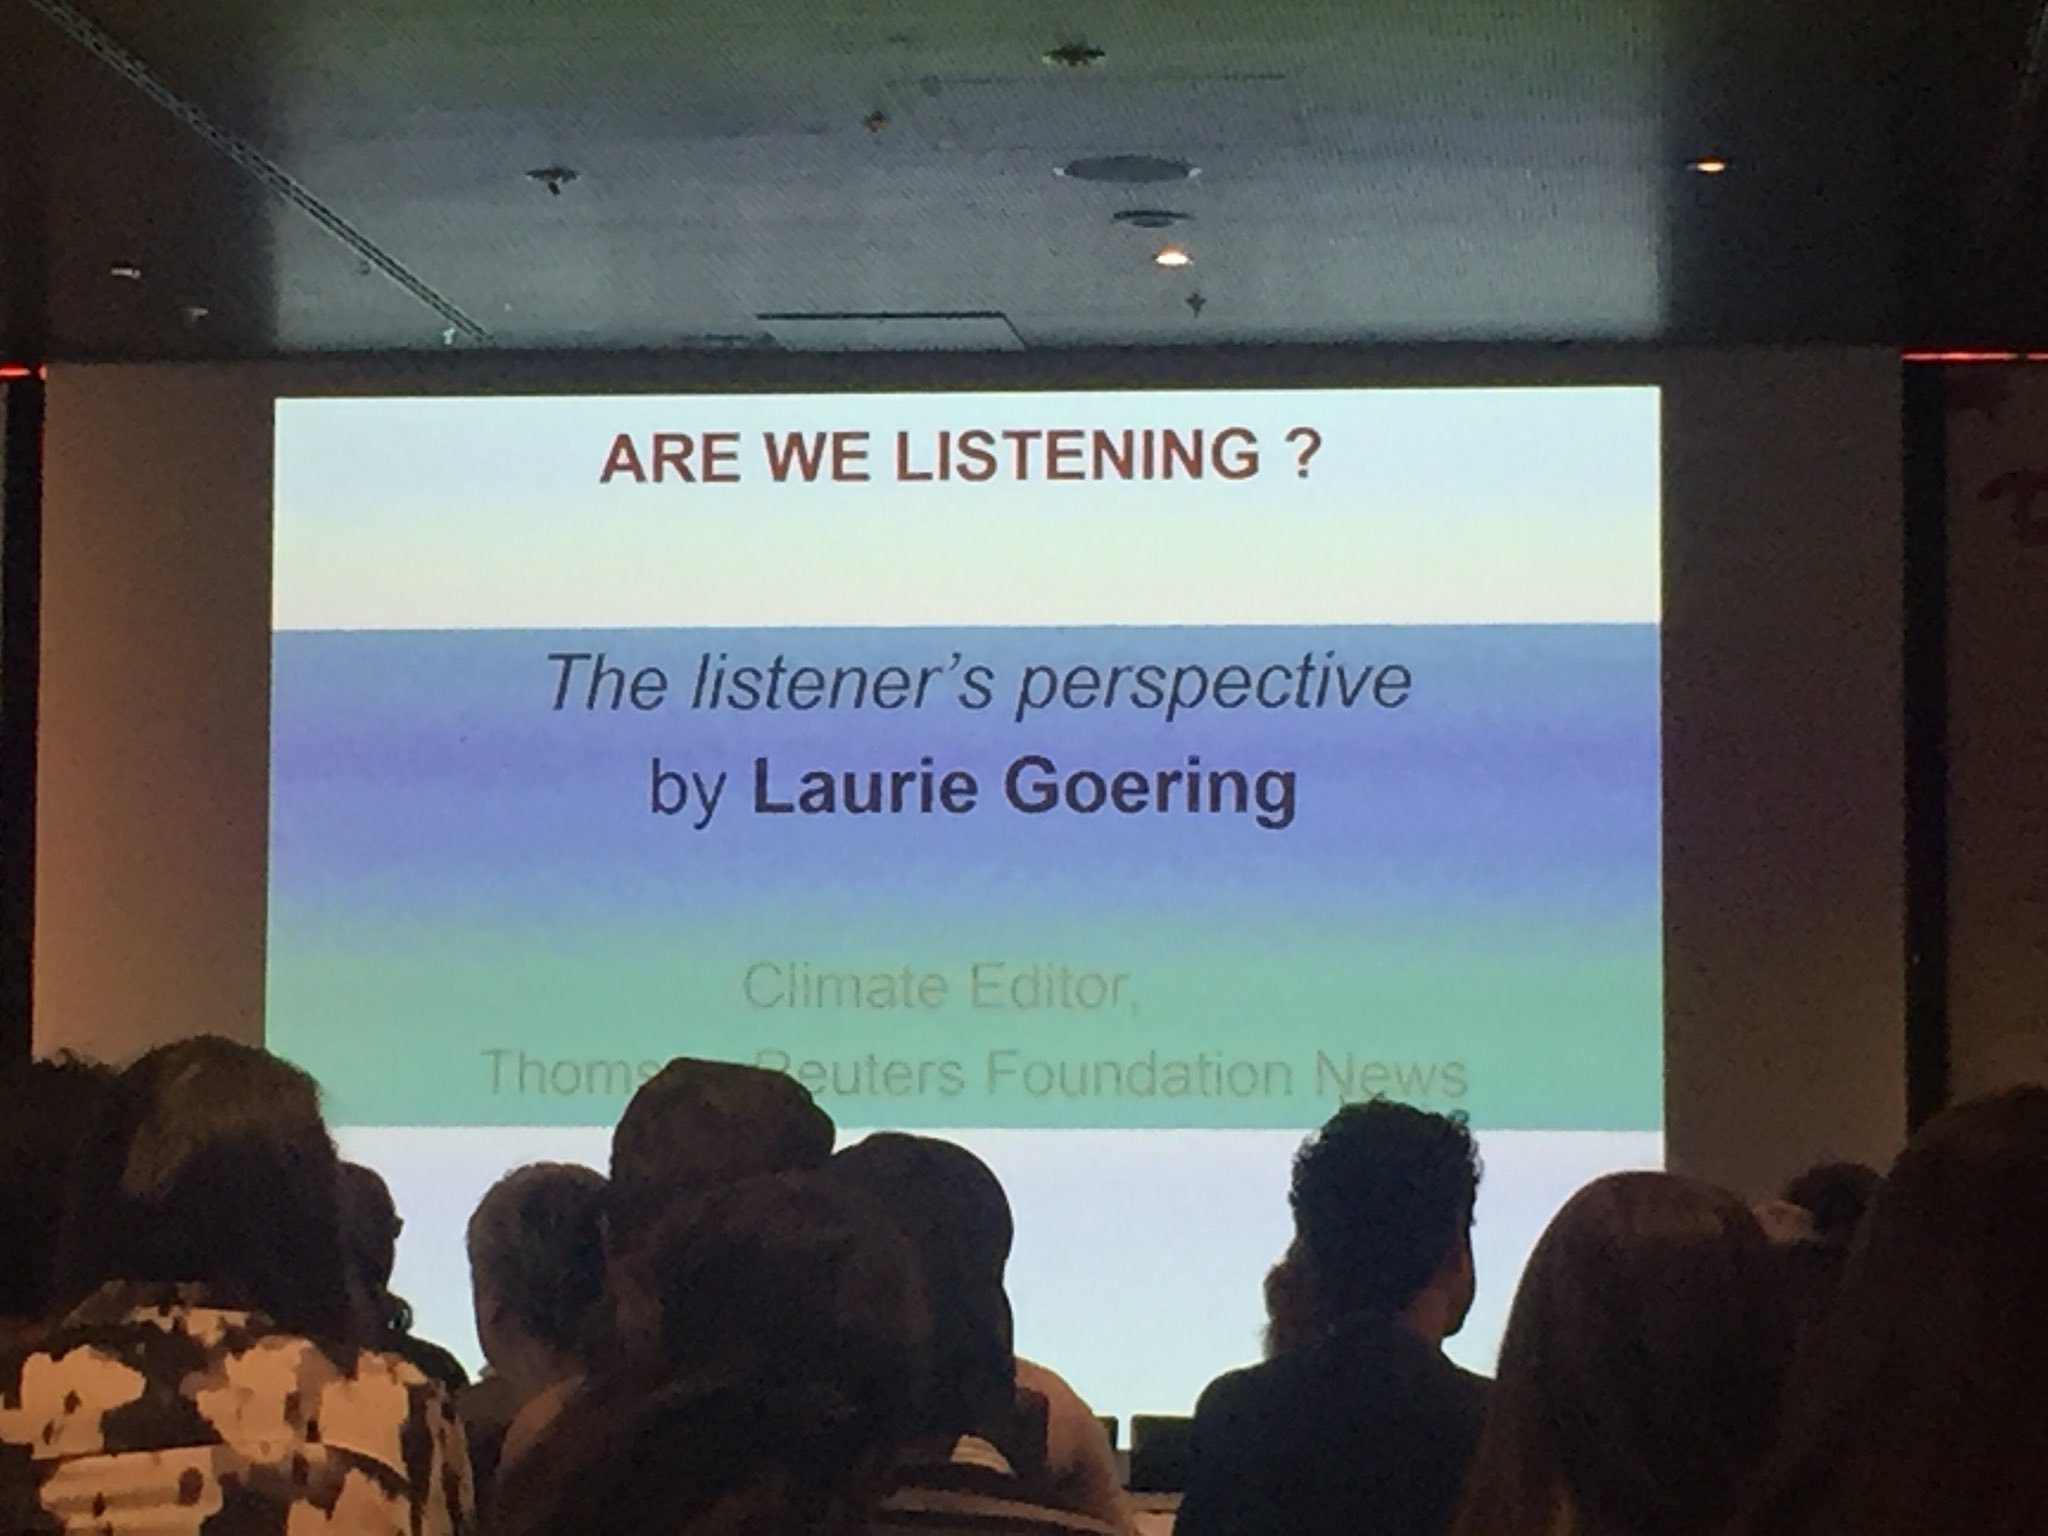 “Start out by finding common ground” when engaging in climate change conversations- “2we need to find new ways to talk” - Laurie Goering @lauriegoering at #DCDays17 https://t.co/N7bSP79LuK